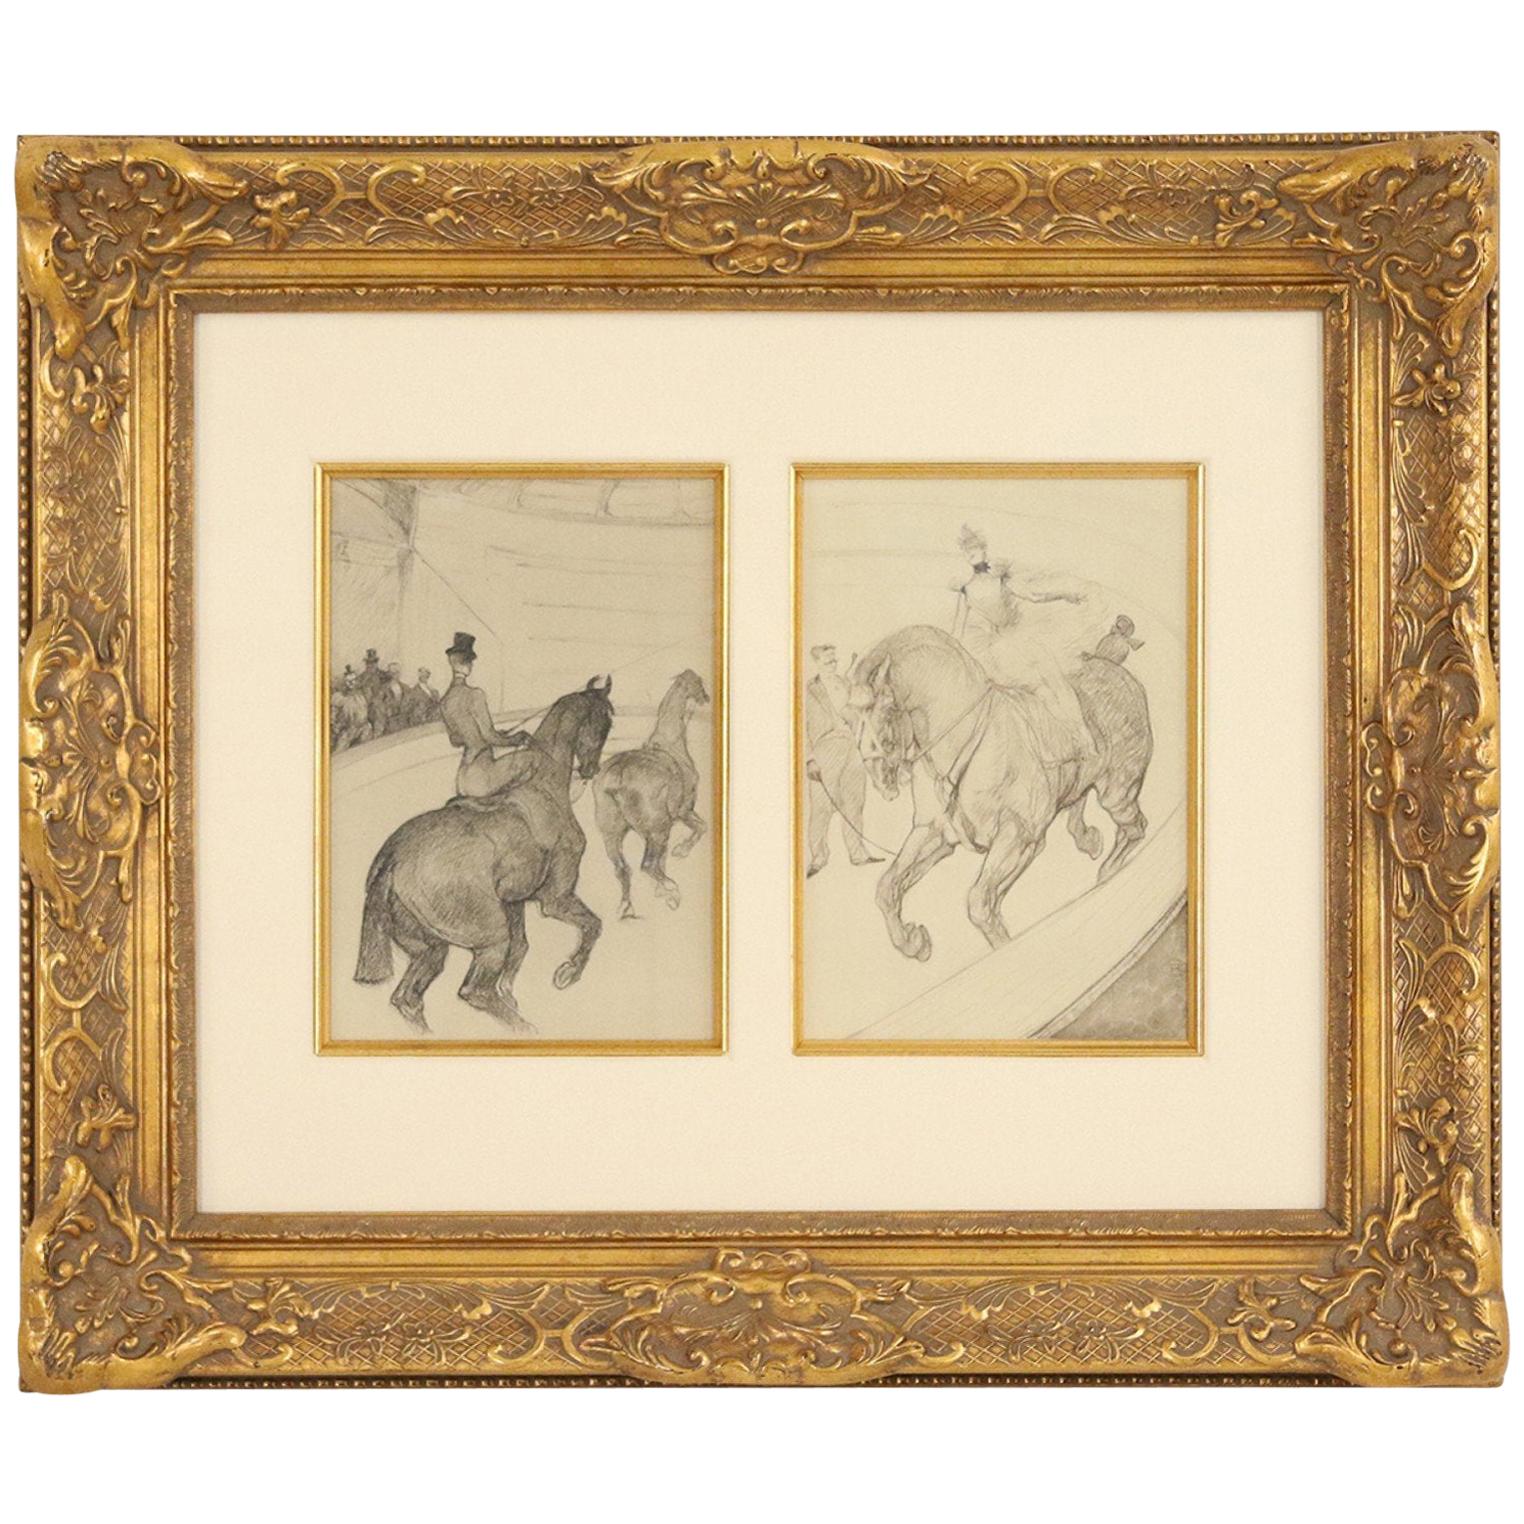 Lautrec Pencil Drawing Diptych of Figures Riding Horses in a Gilt Frame